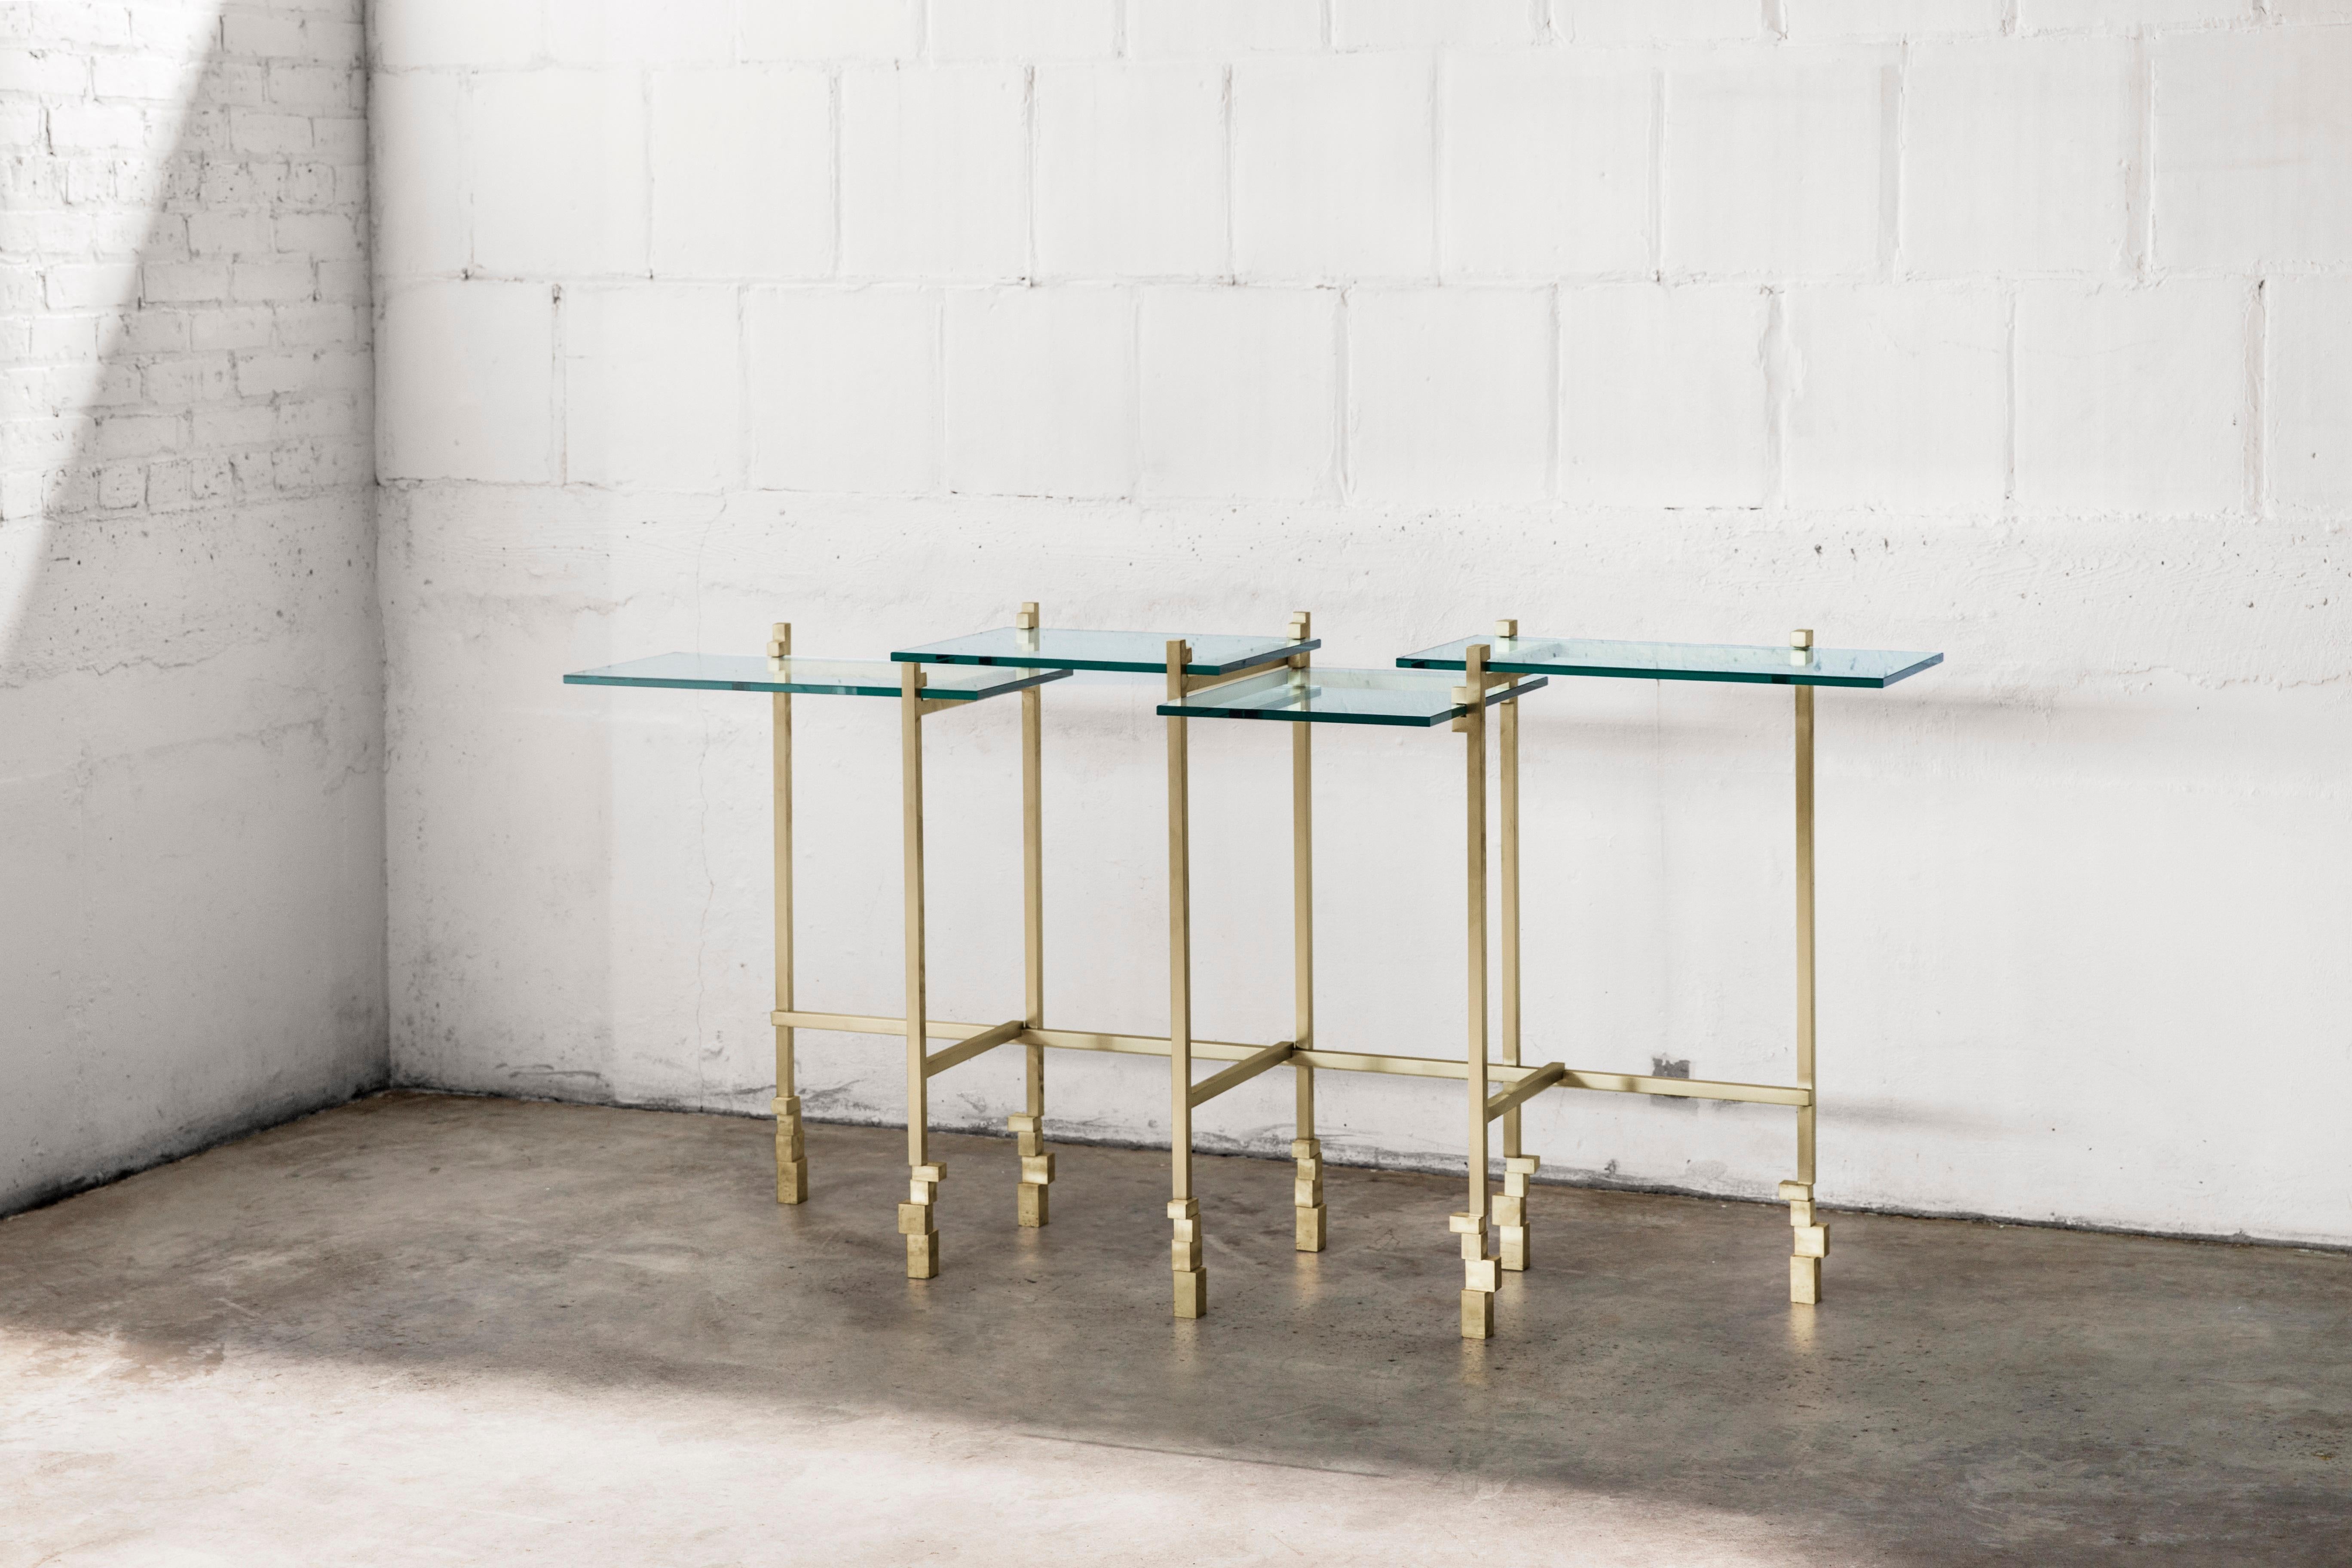 Console table by Gentner Design
Dimensions: D 177.8 x W 37.5 x H 85 cm
Materials: brass, glass

Part of Christopher Gentner's 2018 Fraction Collection, the console table combines multi-leveled glass surface with a brass structure that is punctuated